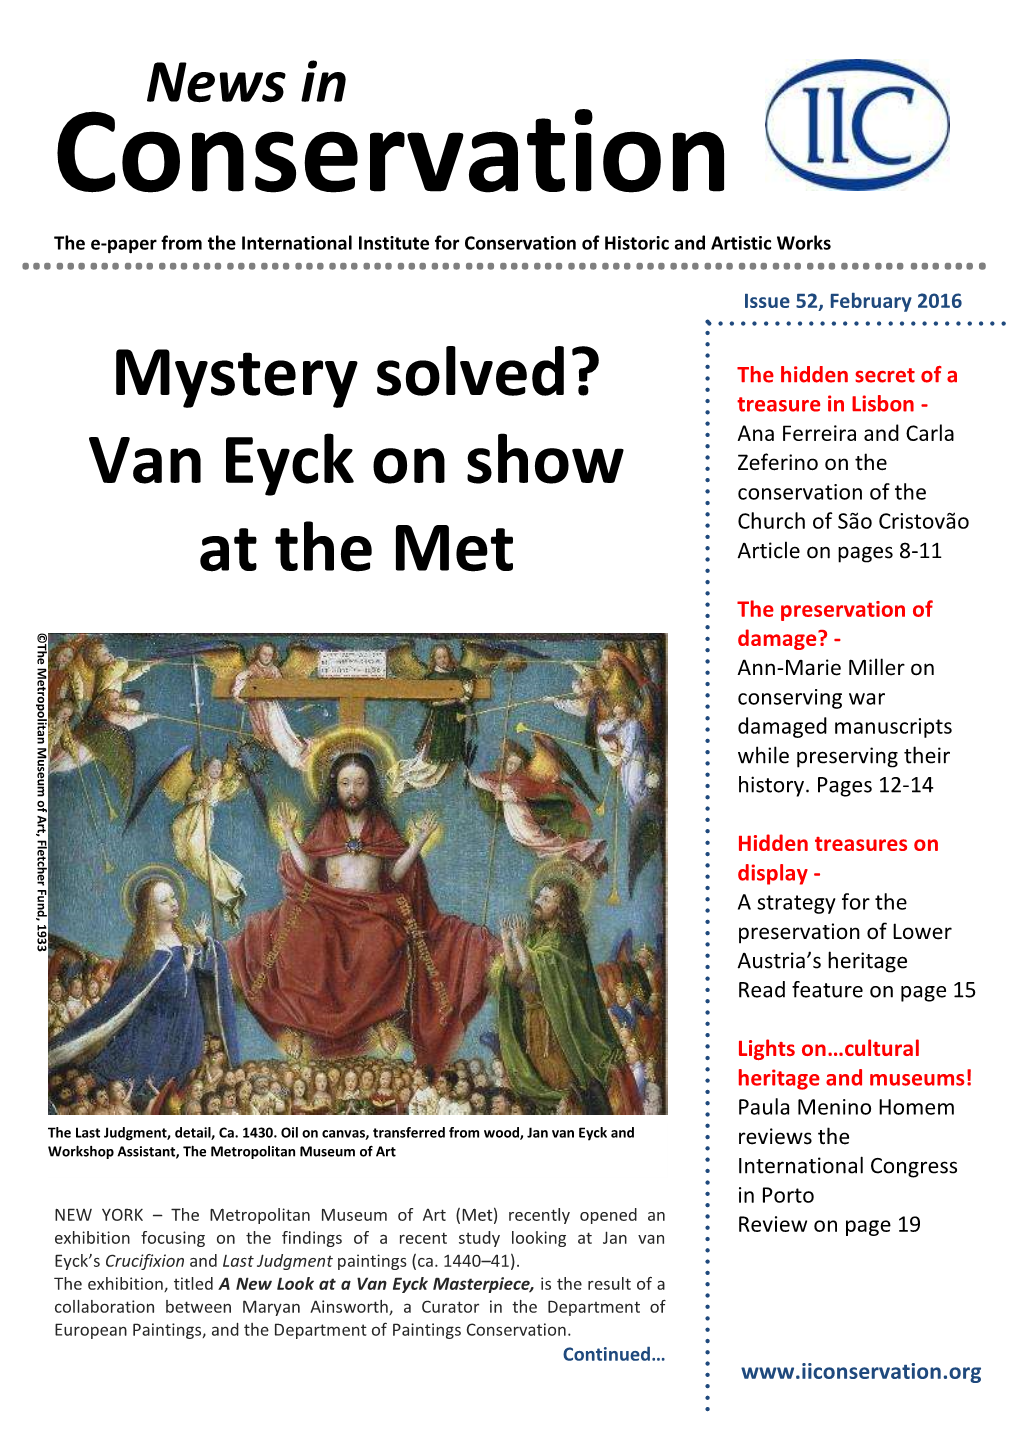 Van Eyck on Show at The